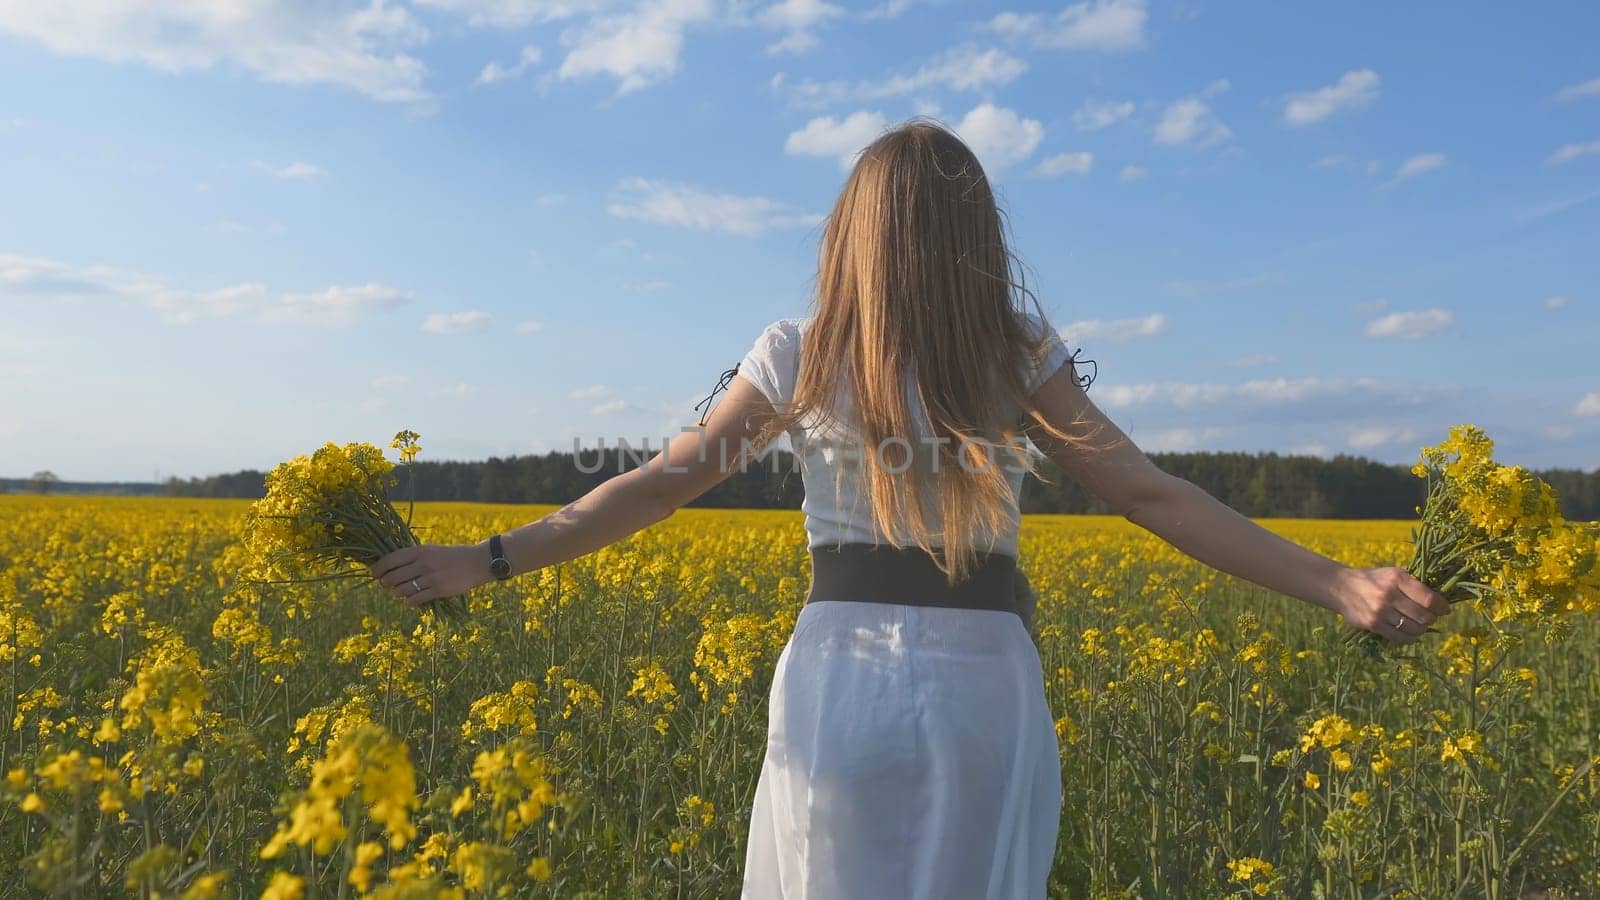 A girl in a white dress runs among a rapeseed field